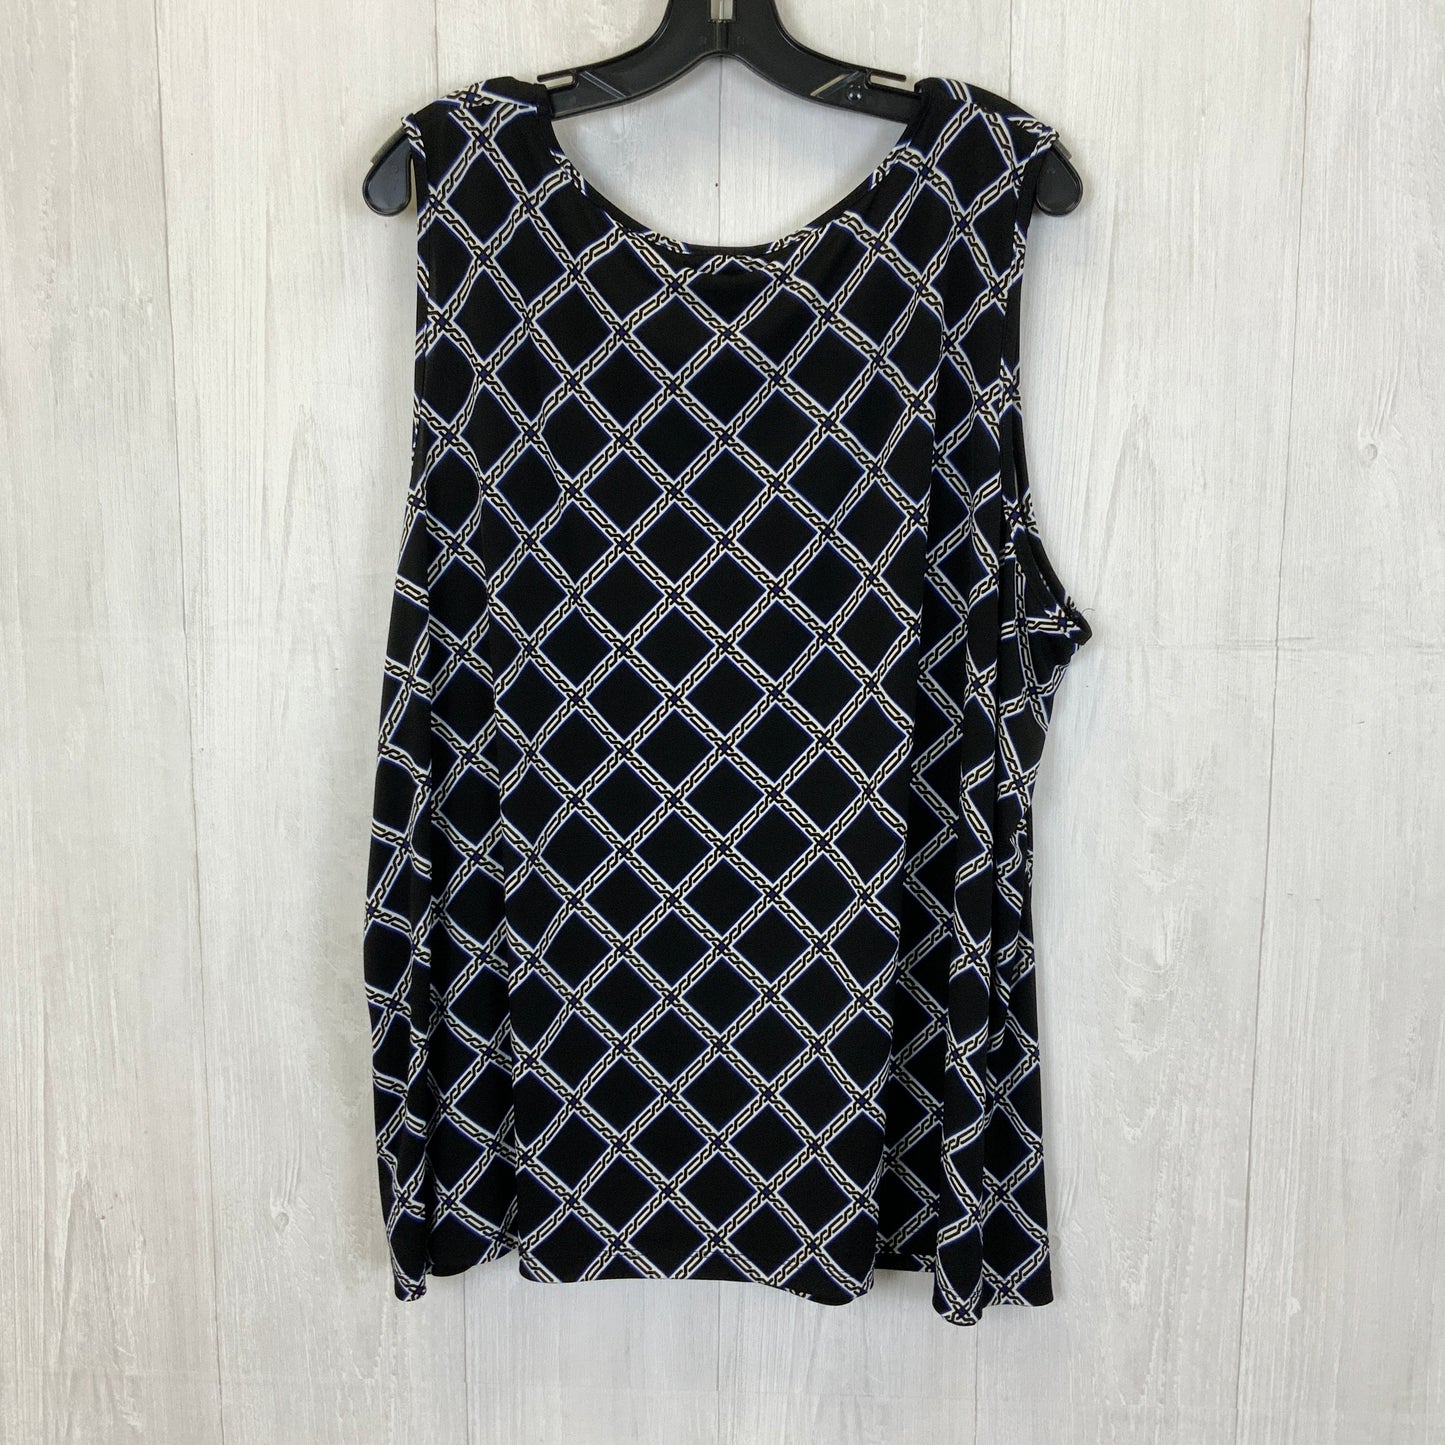 Top Sleeveless Basic By Catherines  Size: 4x